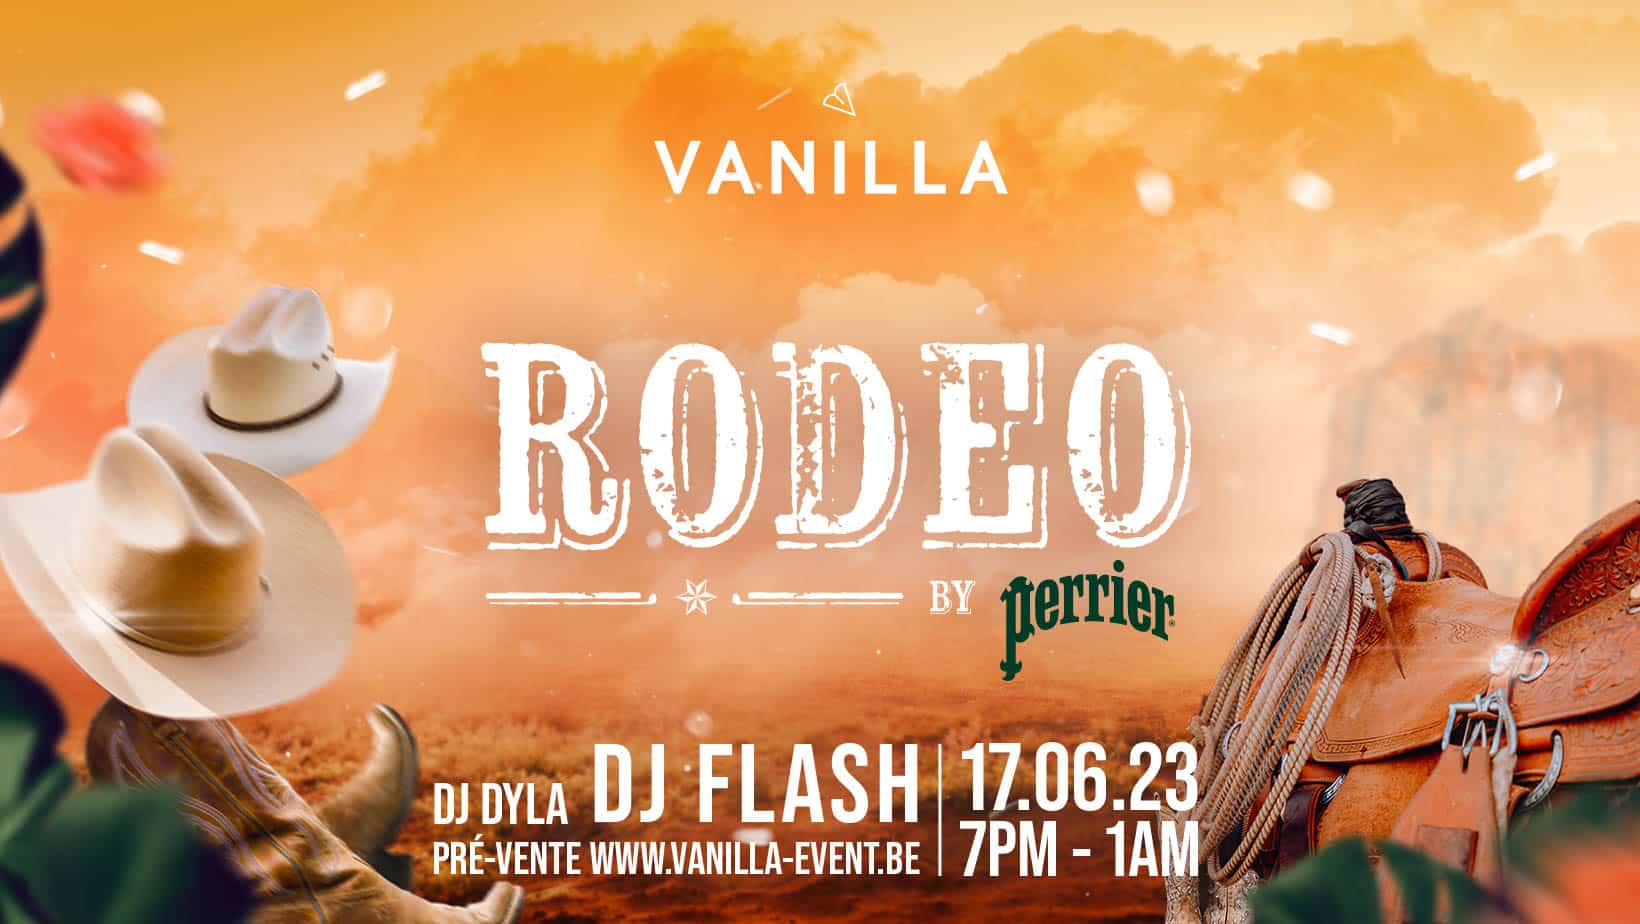 vanilla-event-samedi-rodeo-by-perrier